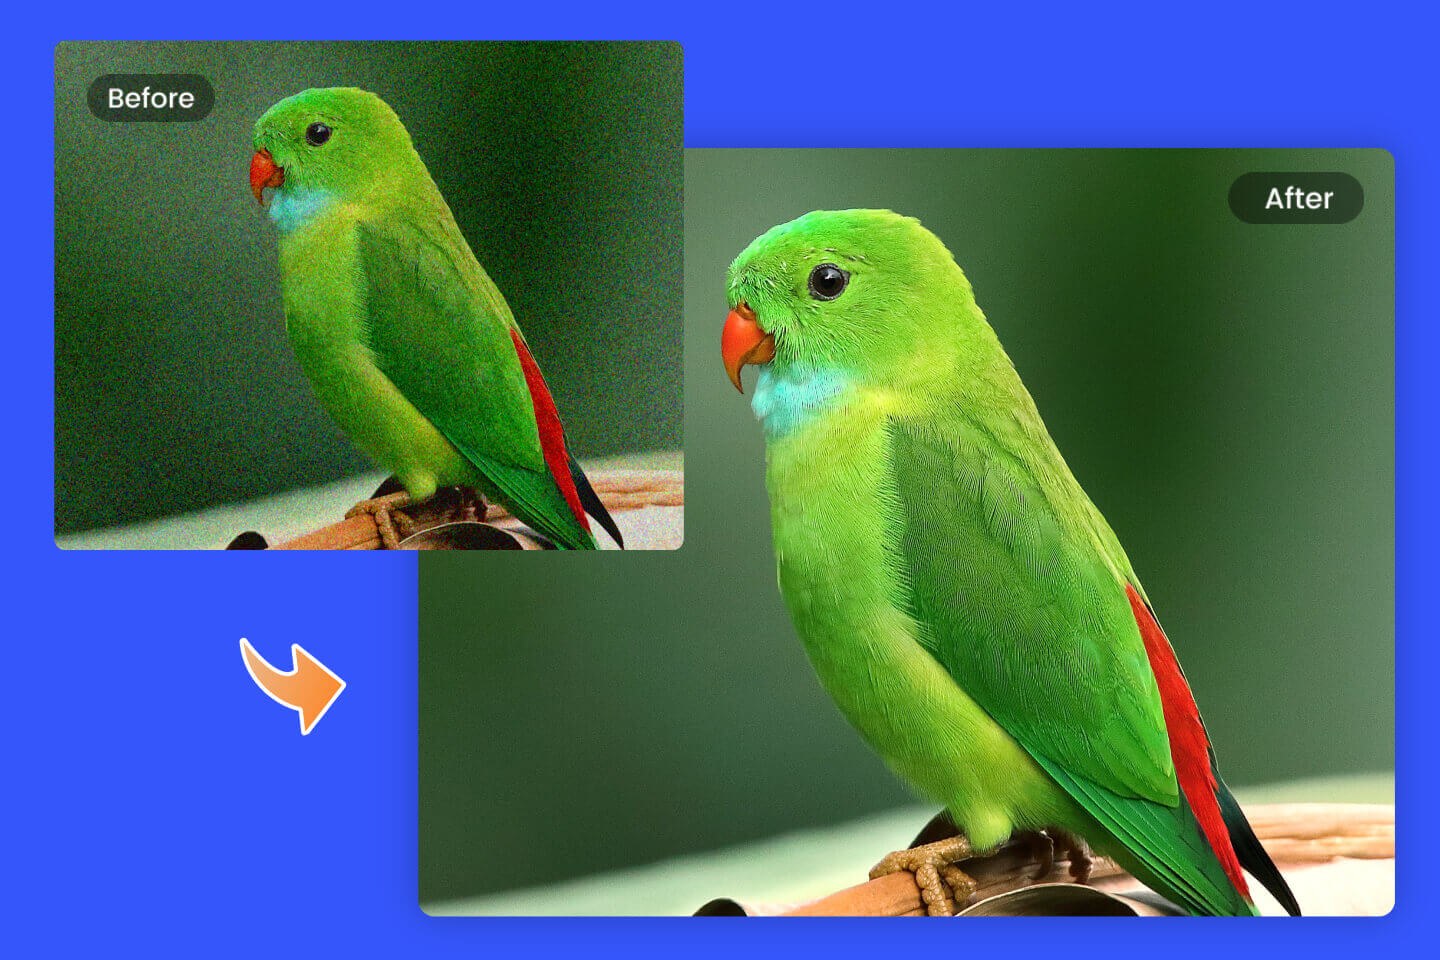 Before and after result of bird image noise reduction